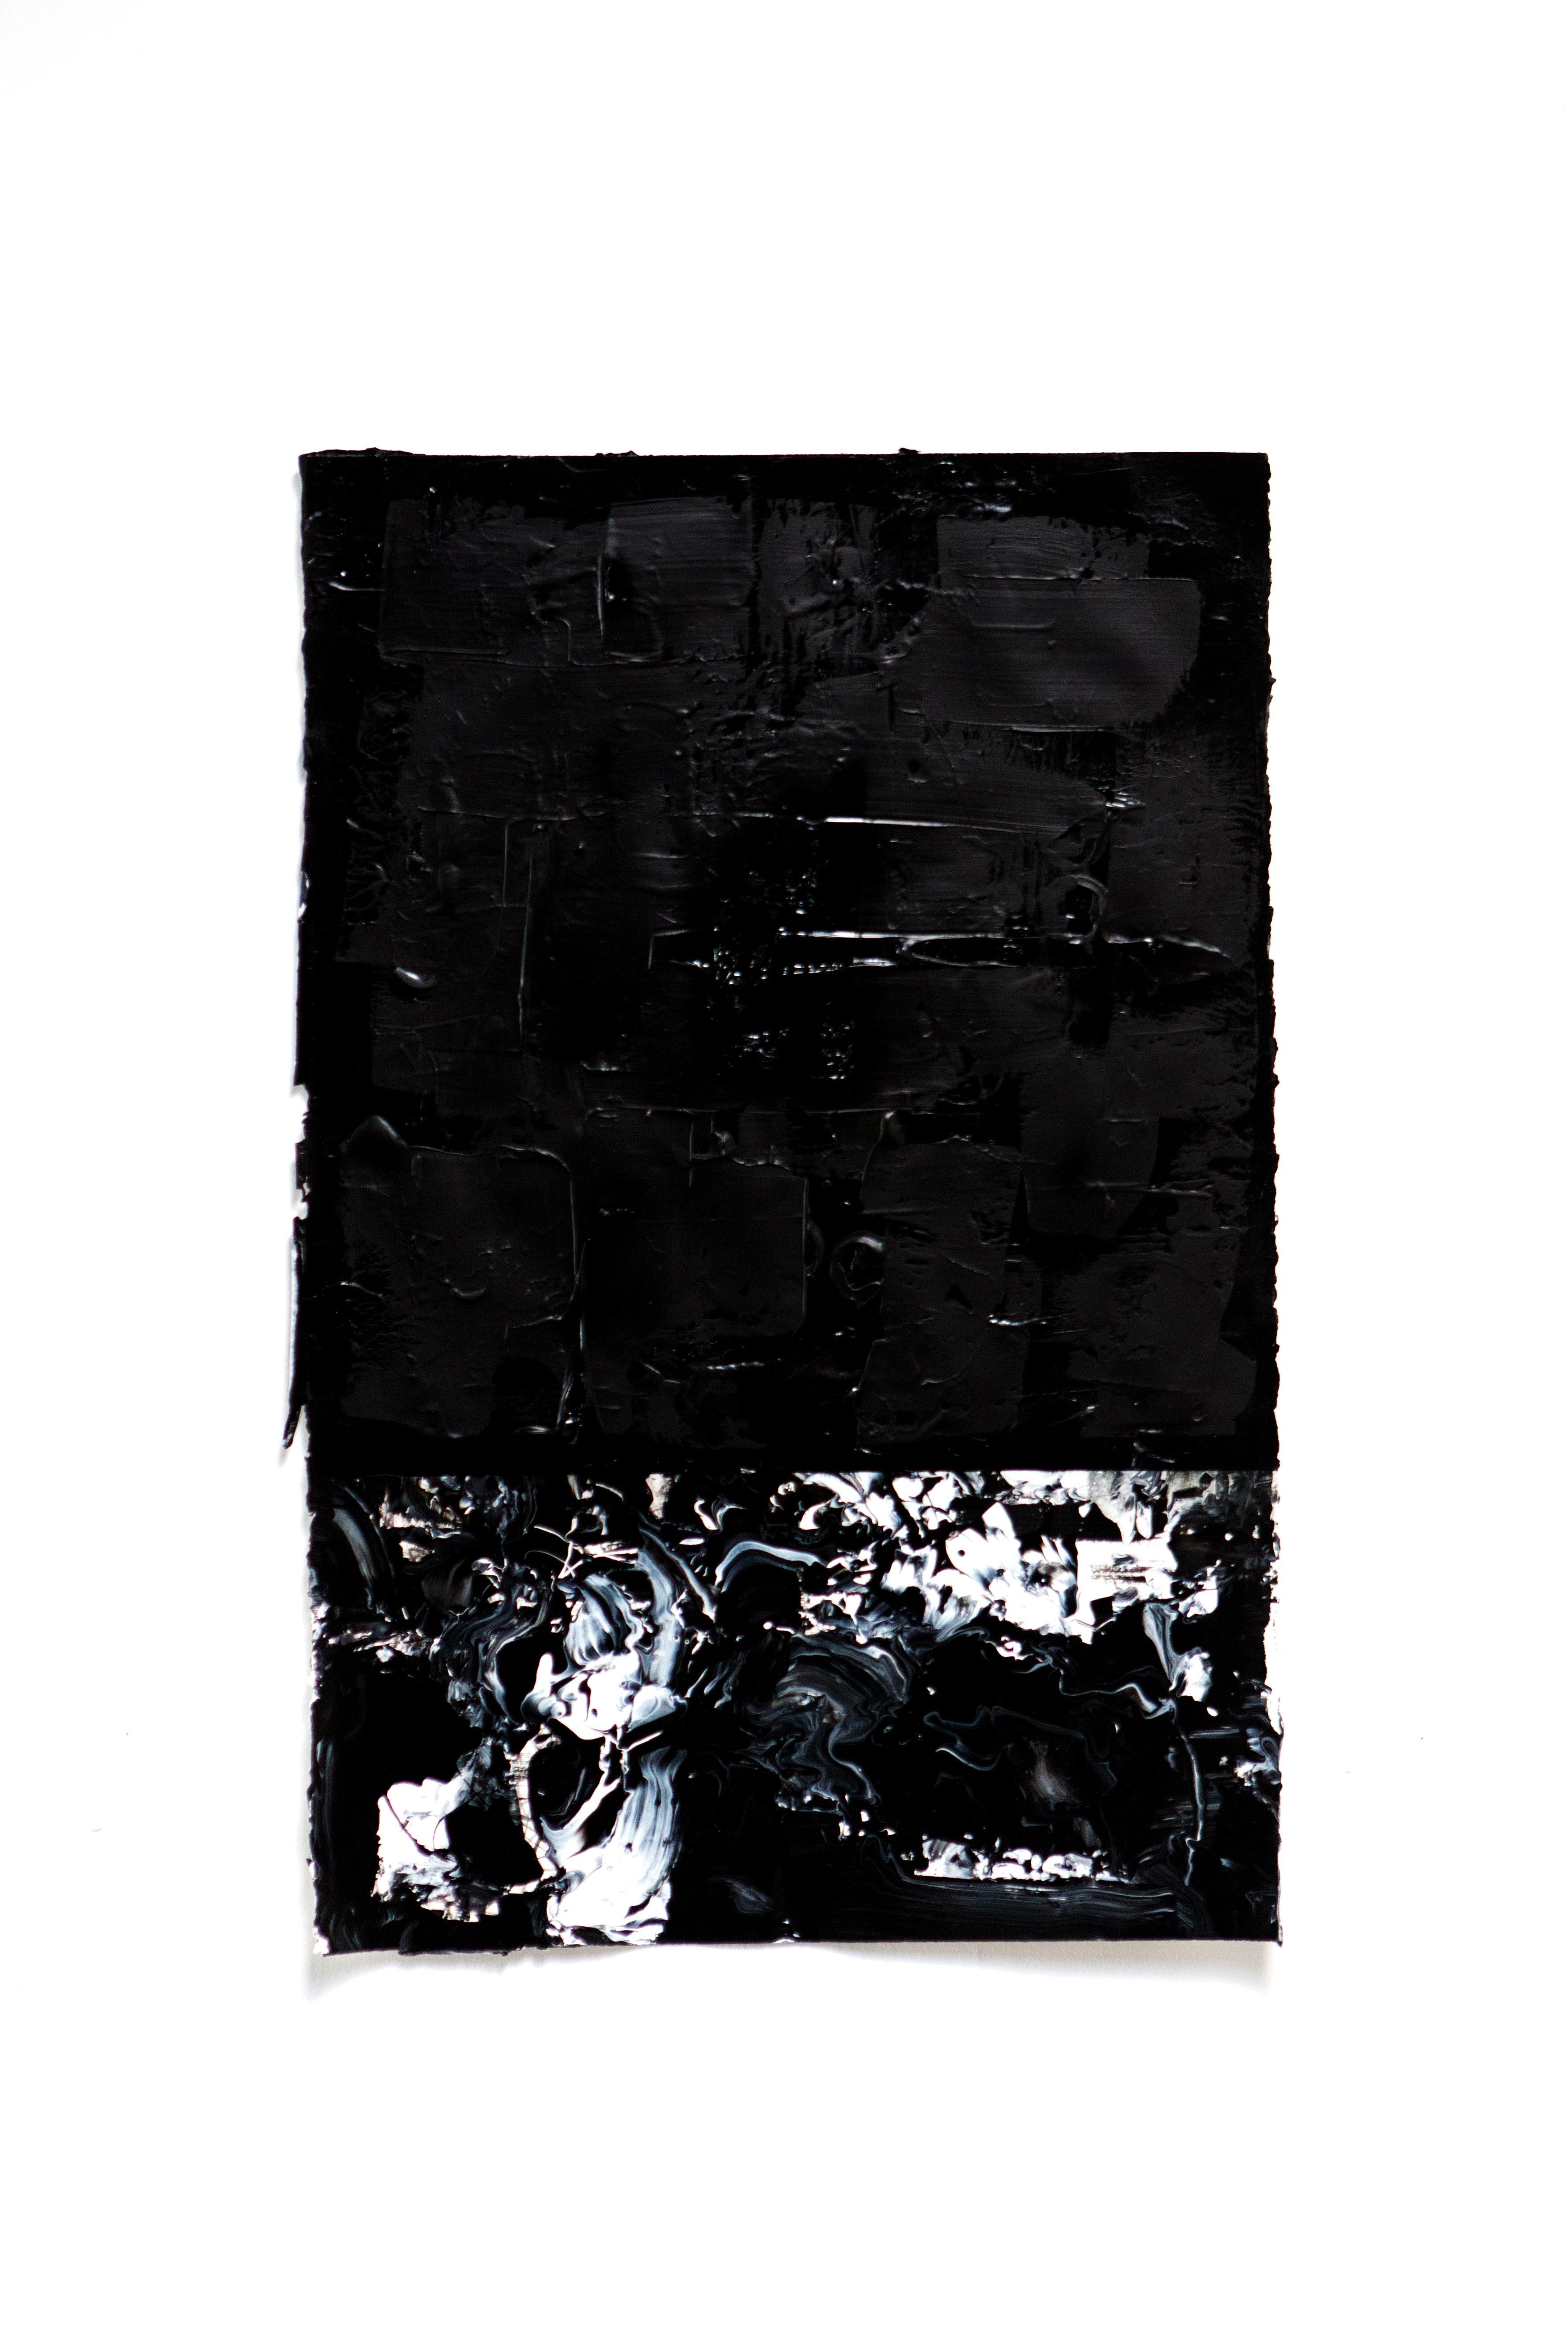 Untitled #4 - Abstract Art by Agathe Toman French Artist Black & White im Angebot 1